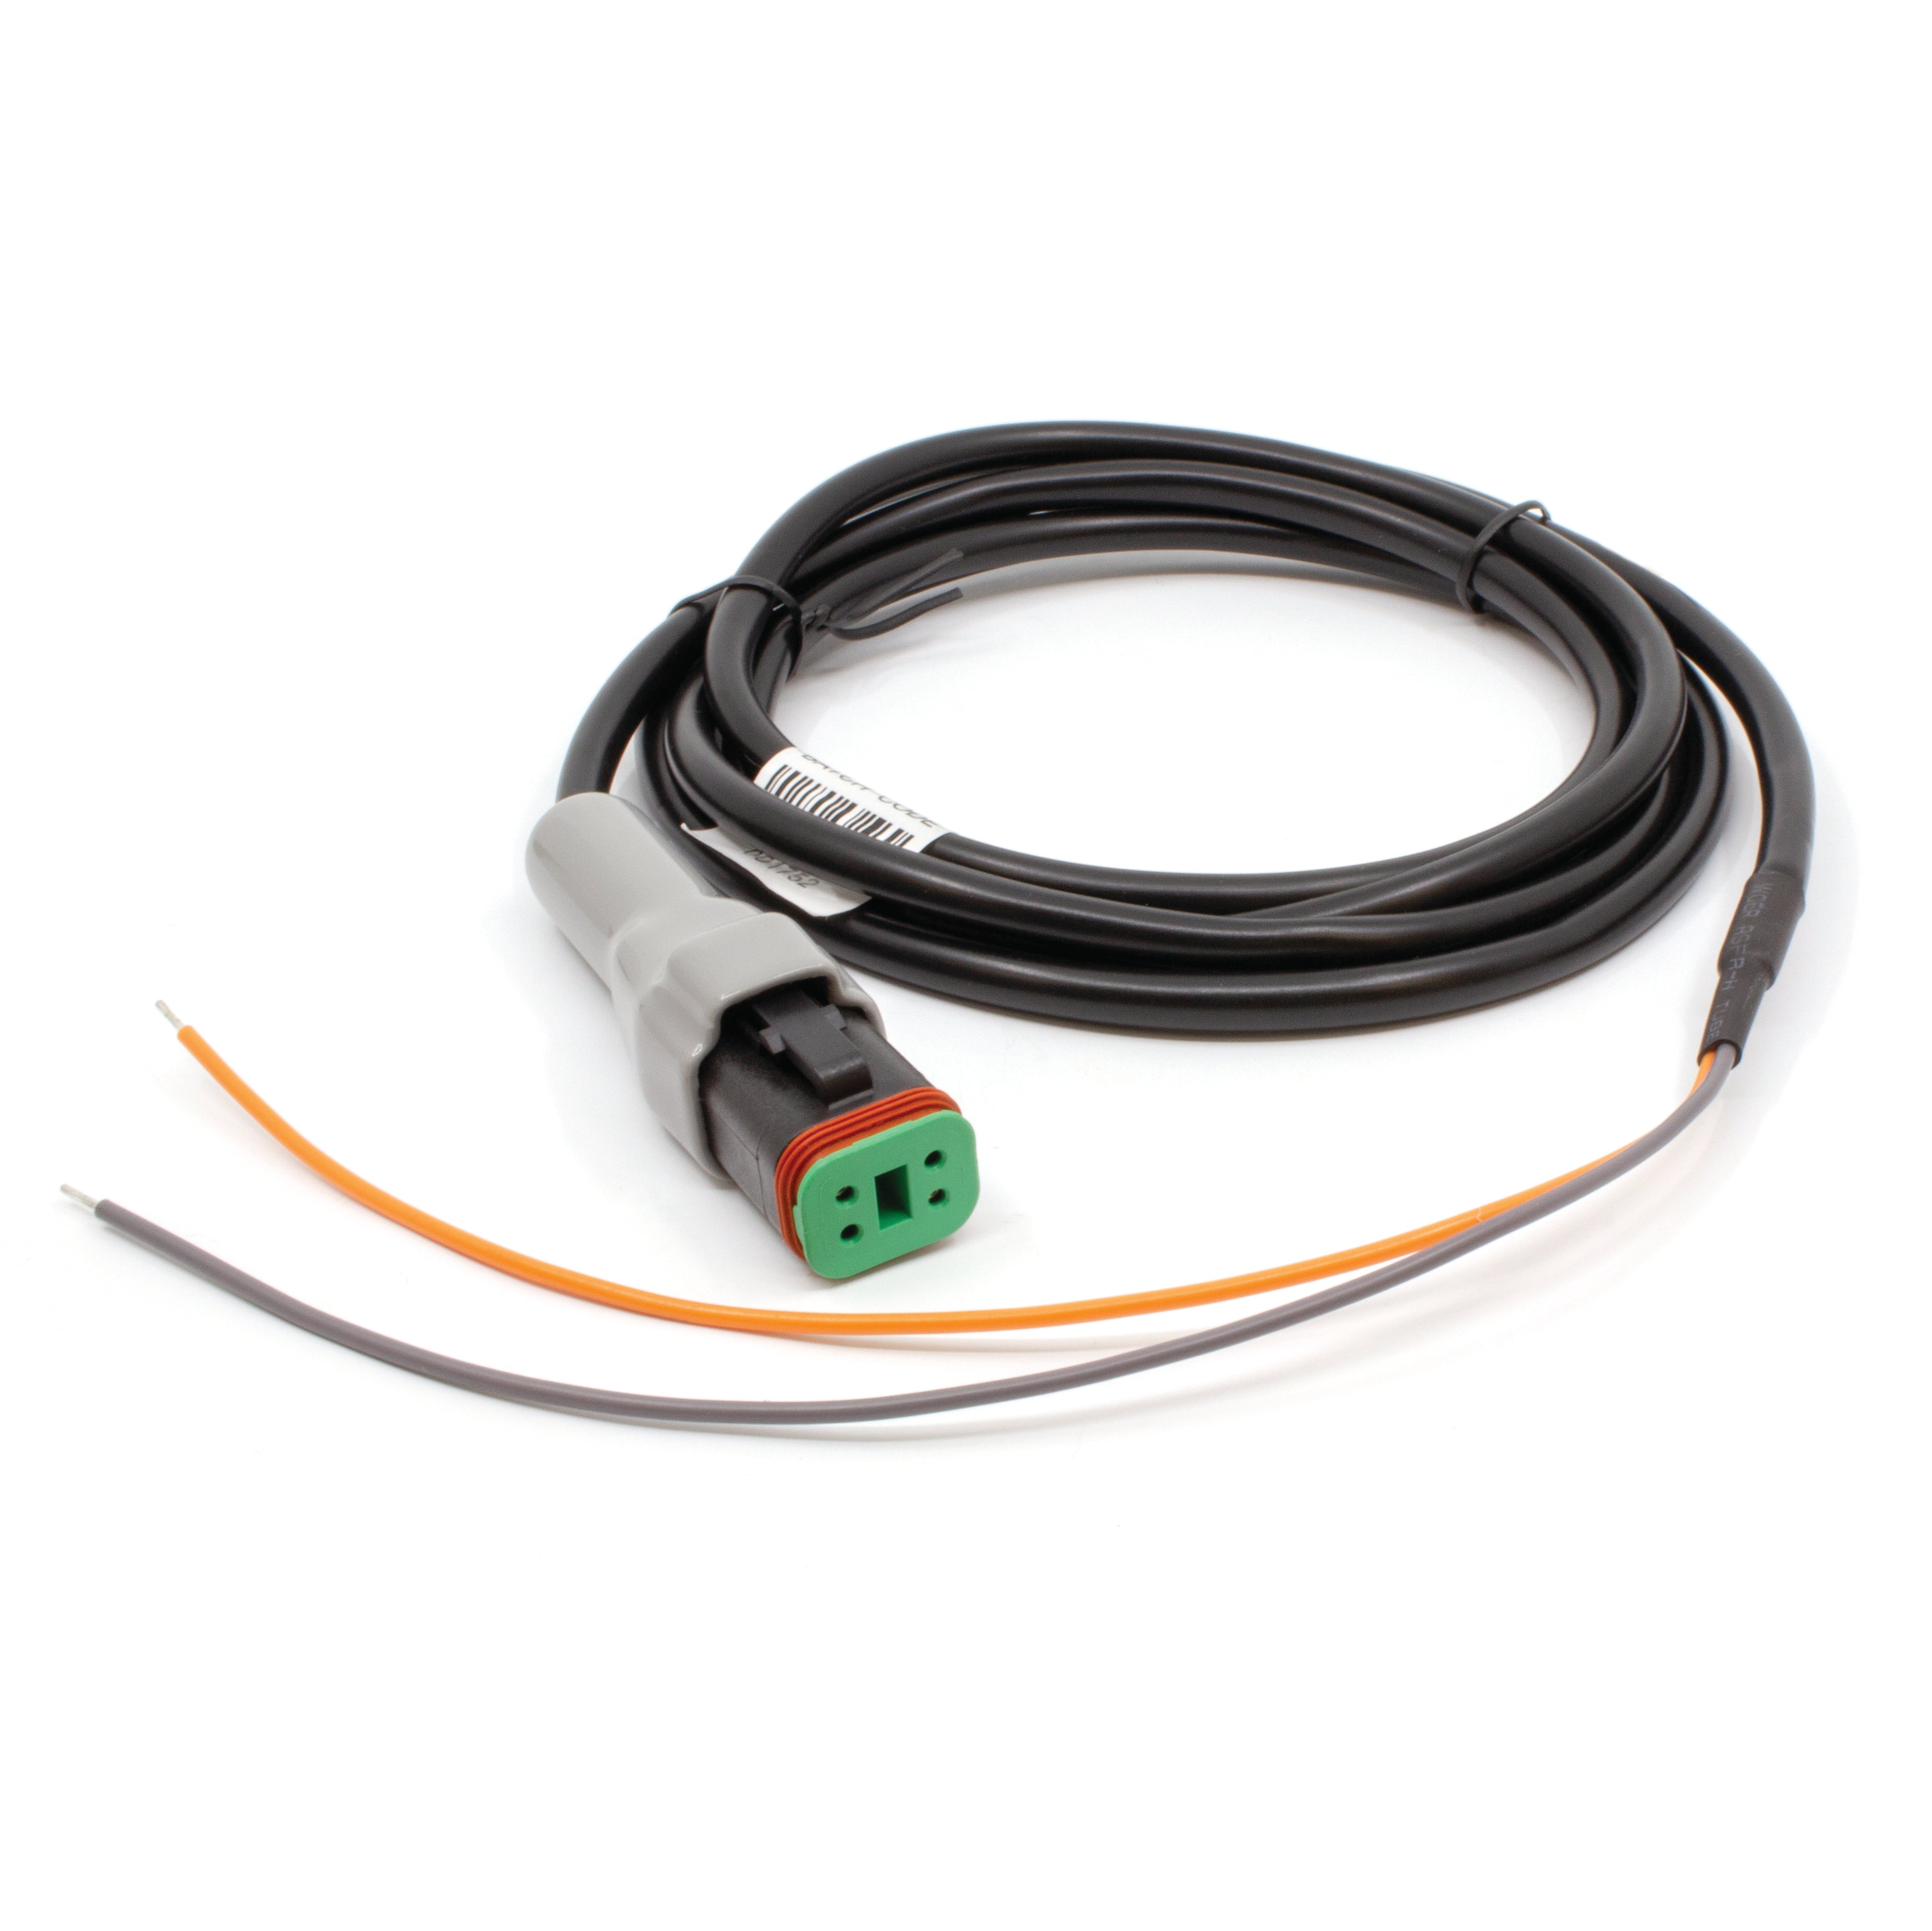 Network power input cable for Backsense radar object detection system